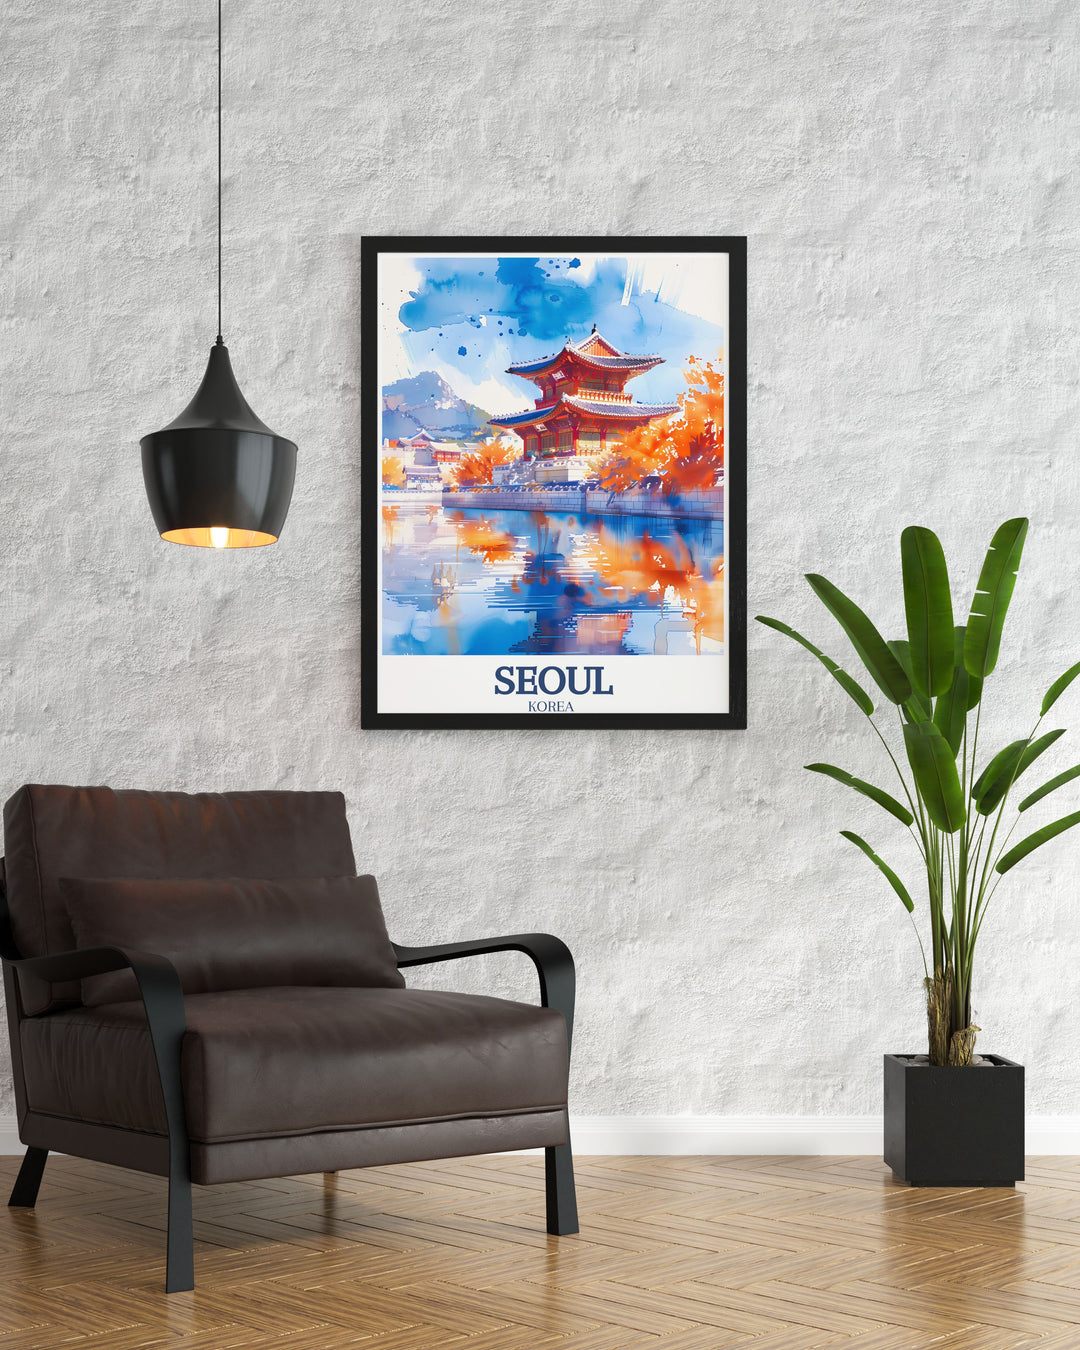 Captivating Seoul Artwork featuring Gyeongbokgung Palace and Han River perfect for home decor and gifts these prints highlight the best of South Korea combining vibrant colors with detailed craftsmanship